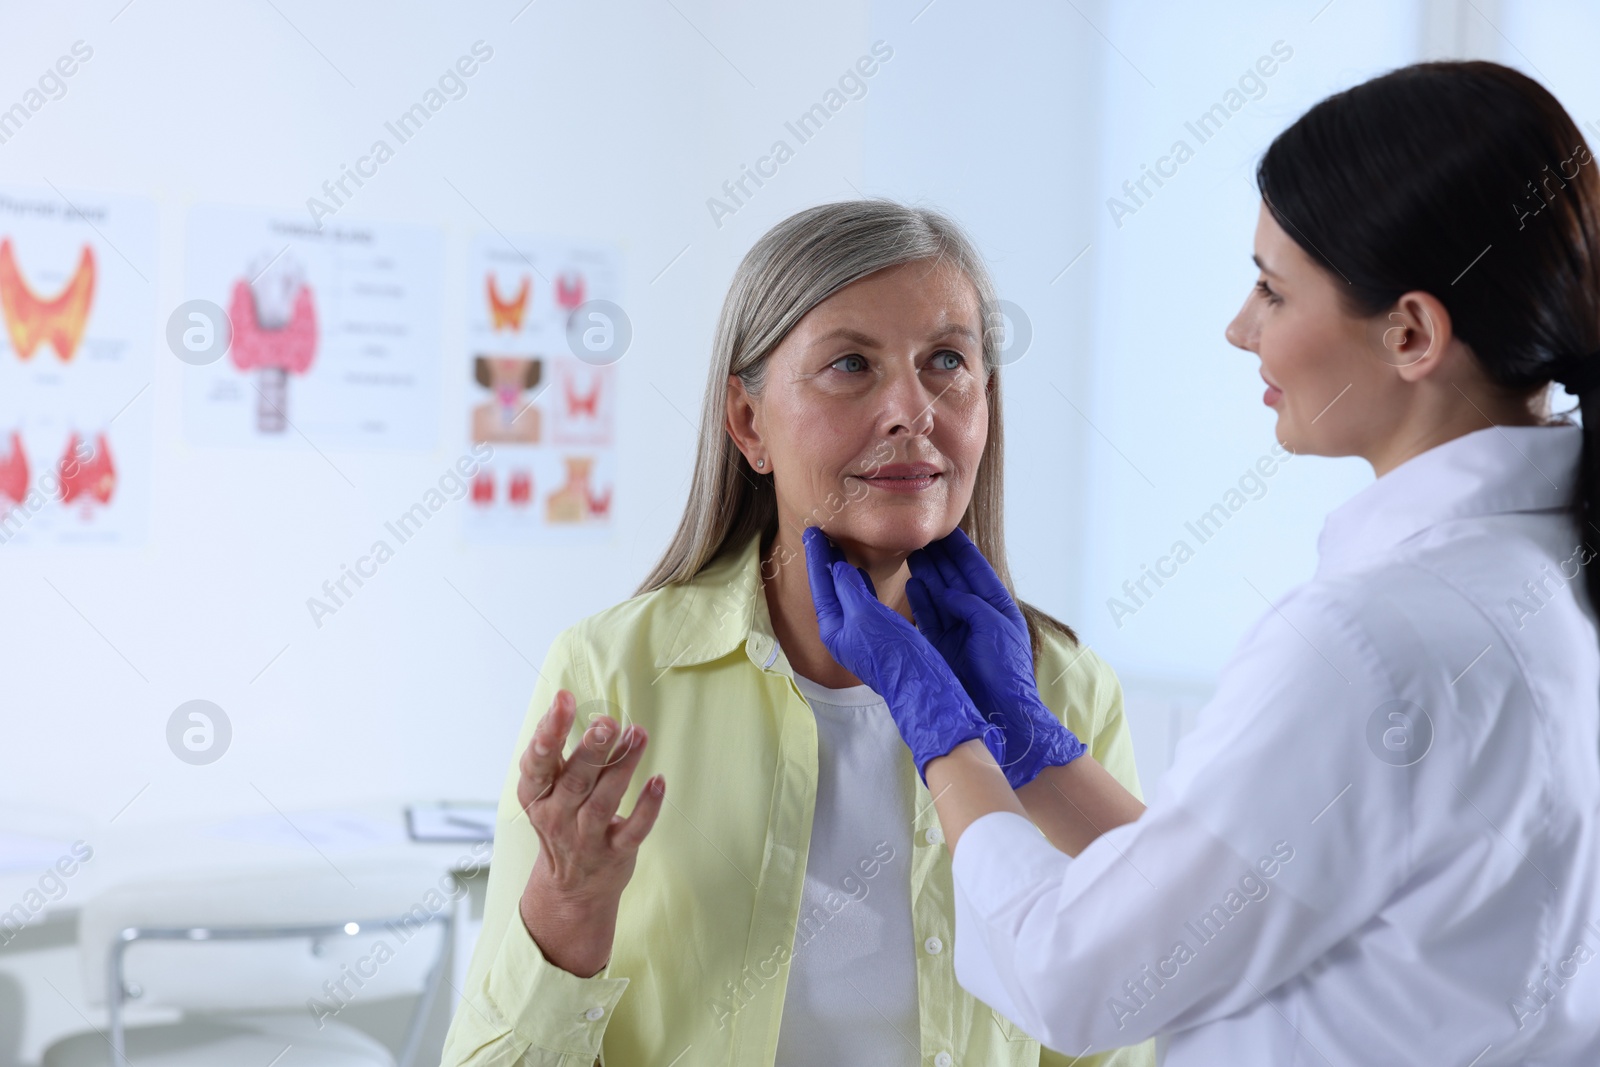 Photo of Endocrinologist examining thyroid gland of patient at hospital